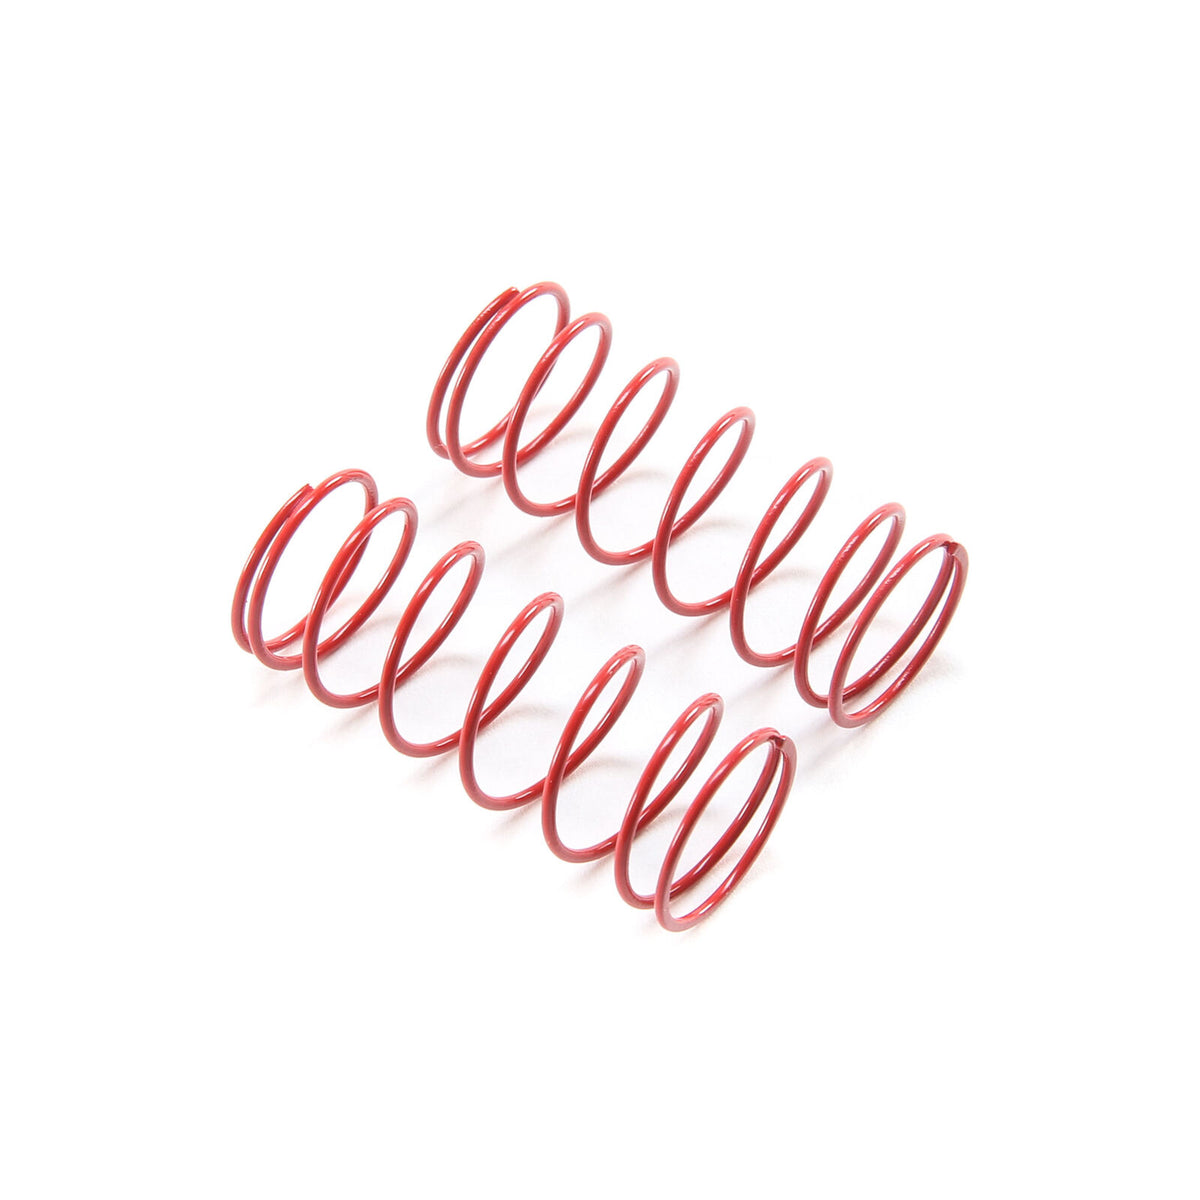 Axial Spring 12.5x35mm 1.79lbs, Red Springs (2)